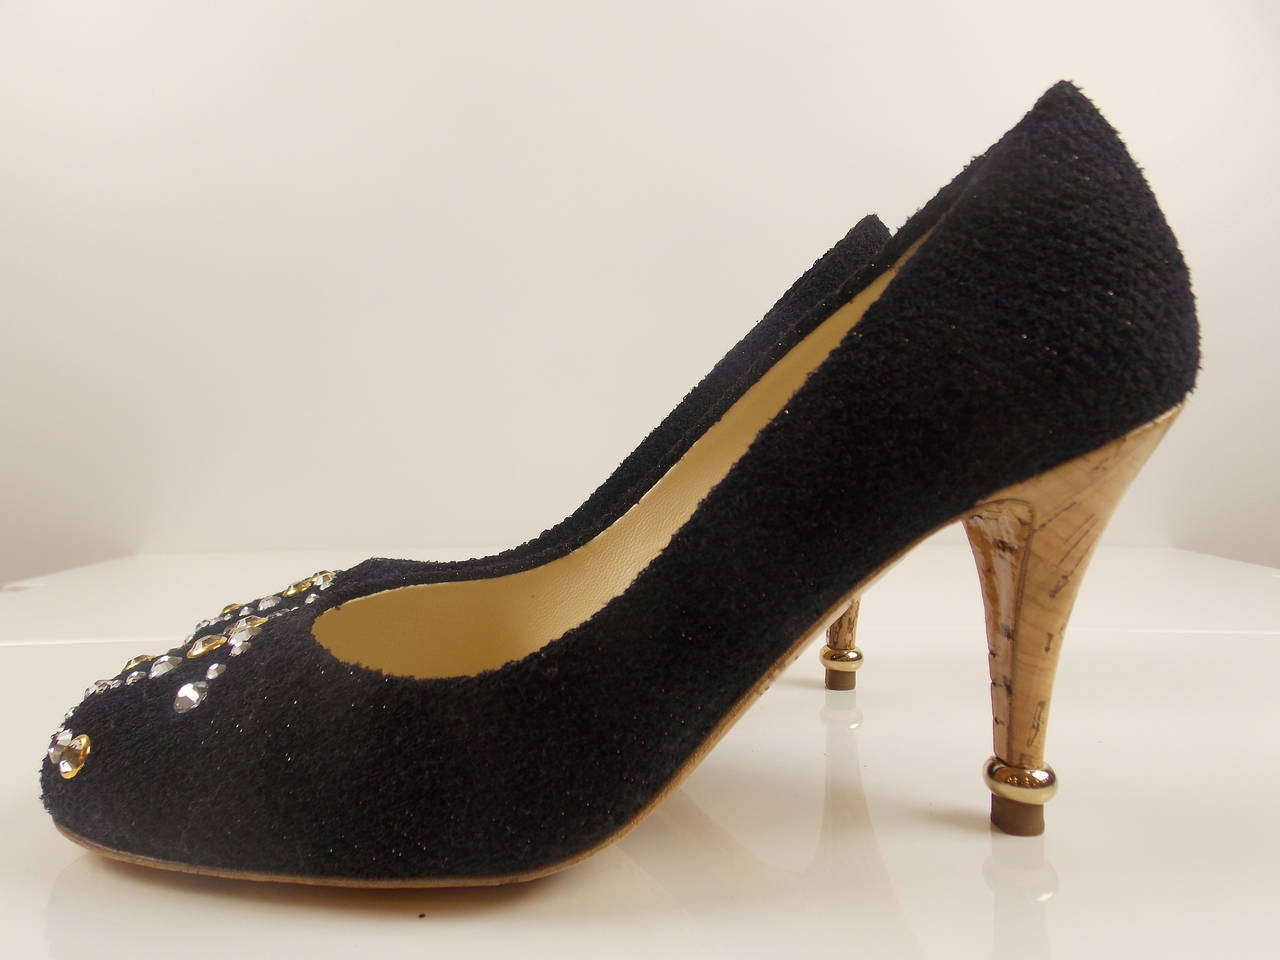 Sparkle tweed fabrication, lacquered cork heels and soles, gold ring detail above heel tap with crystal interlocking CC's.